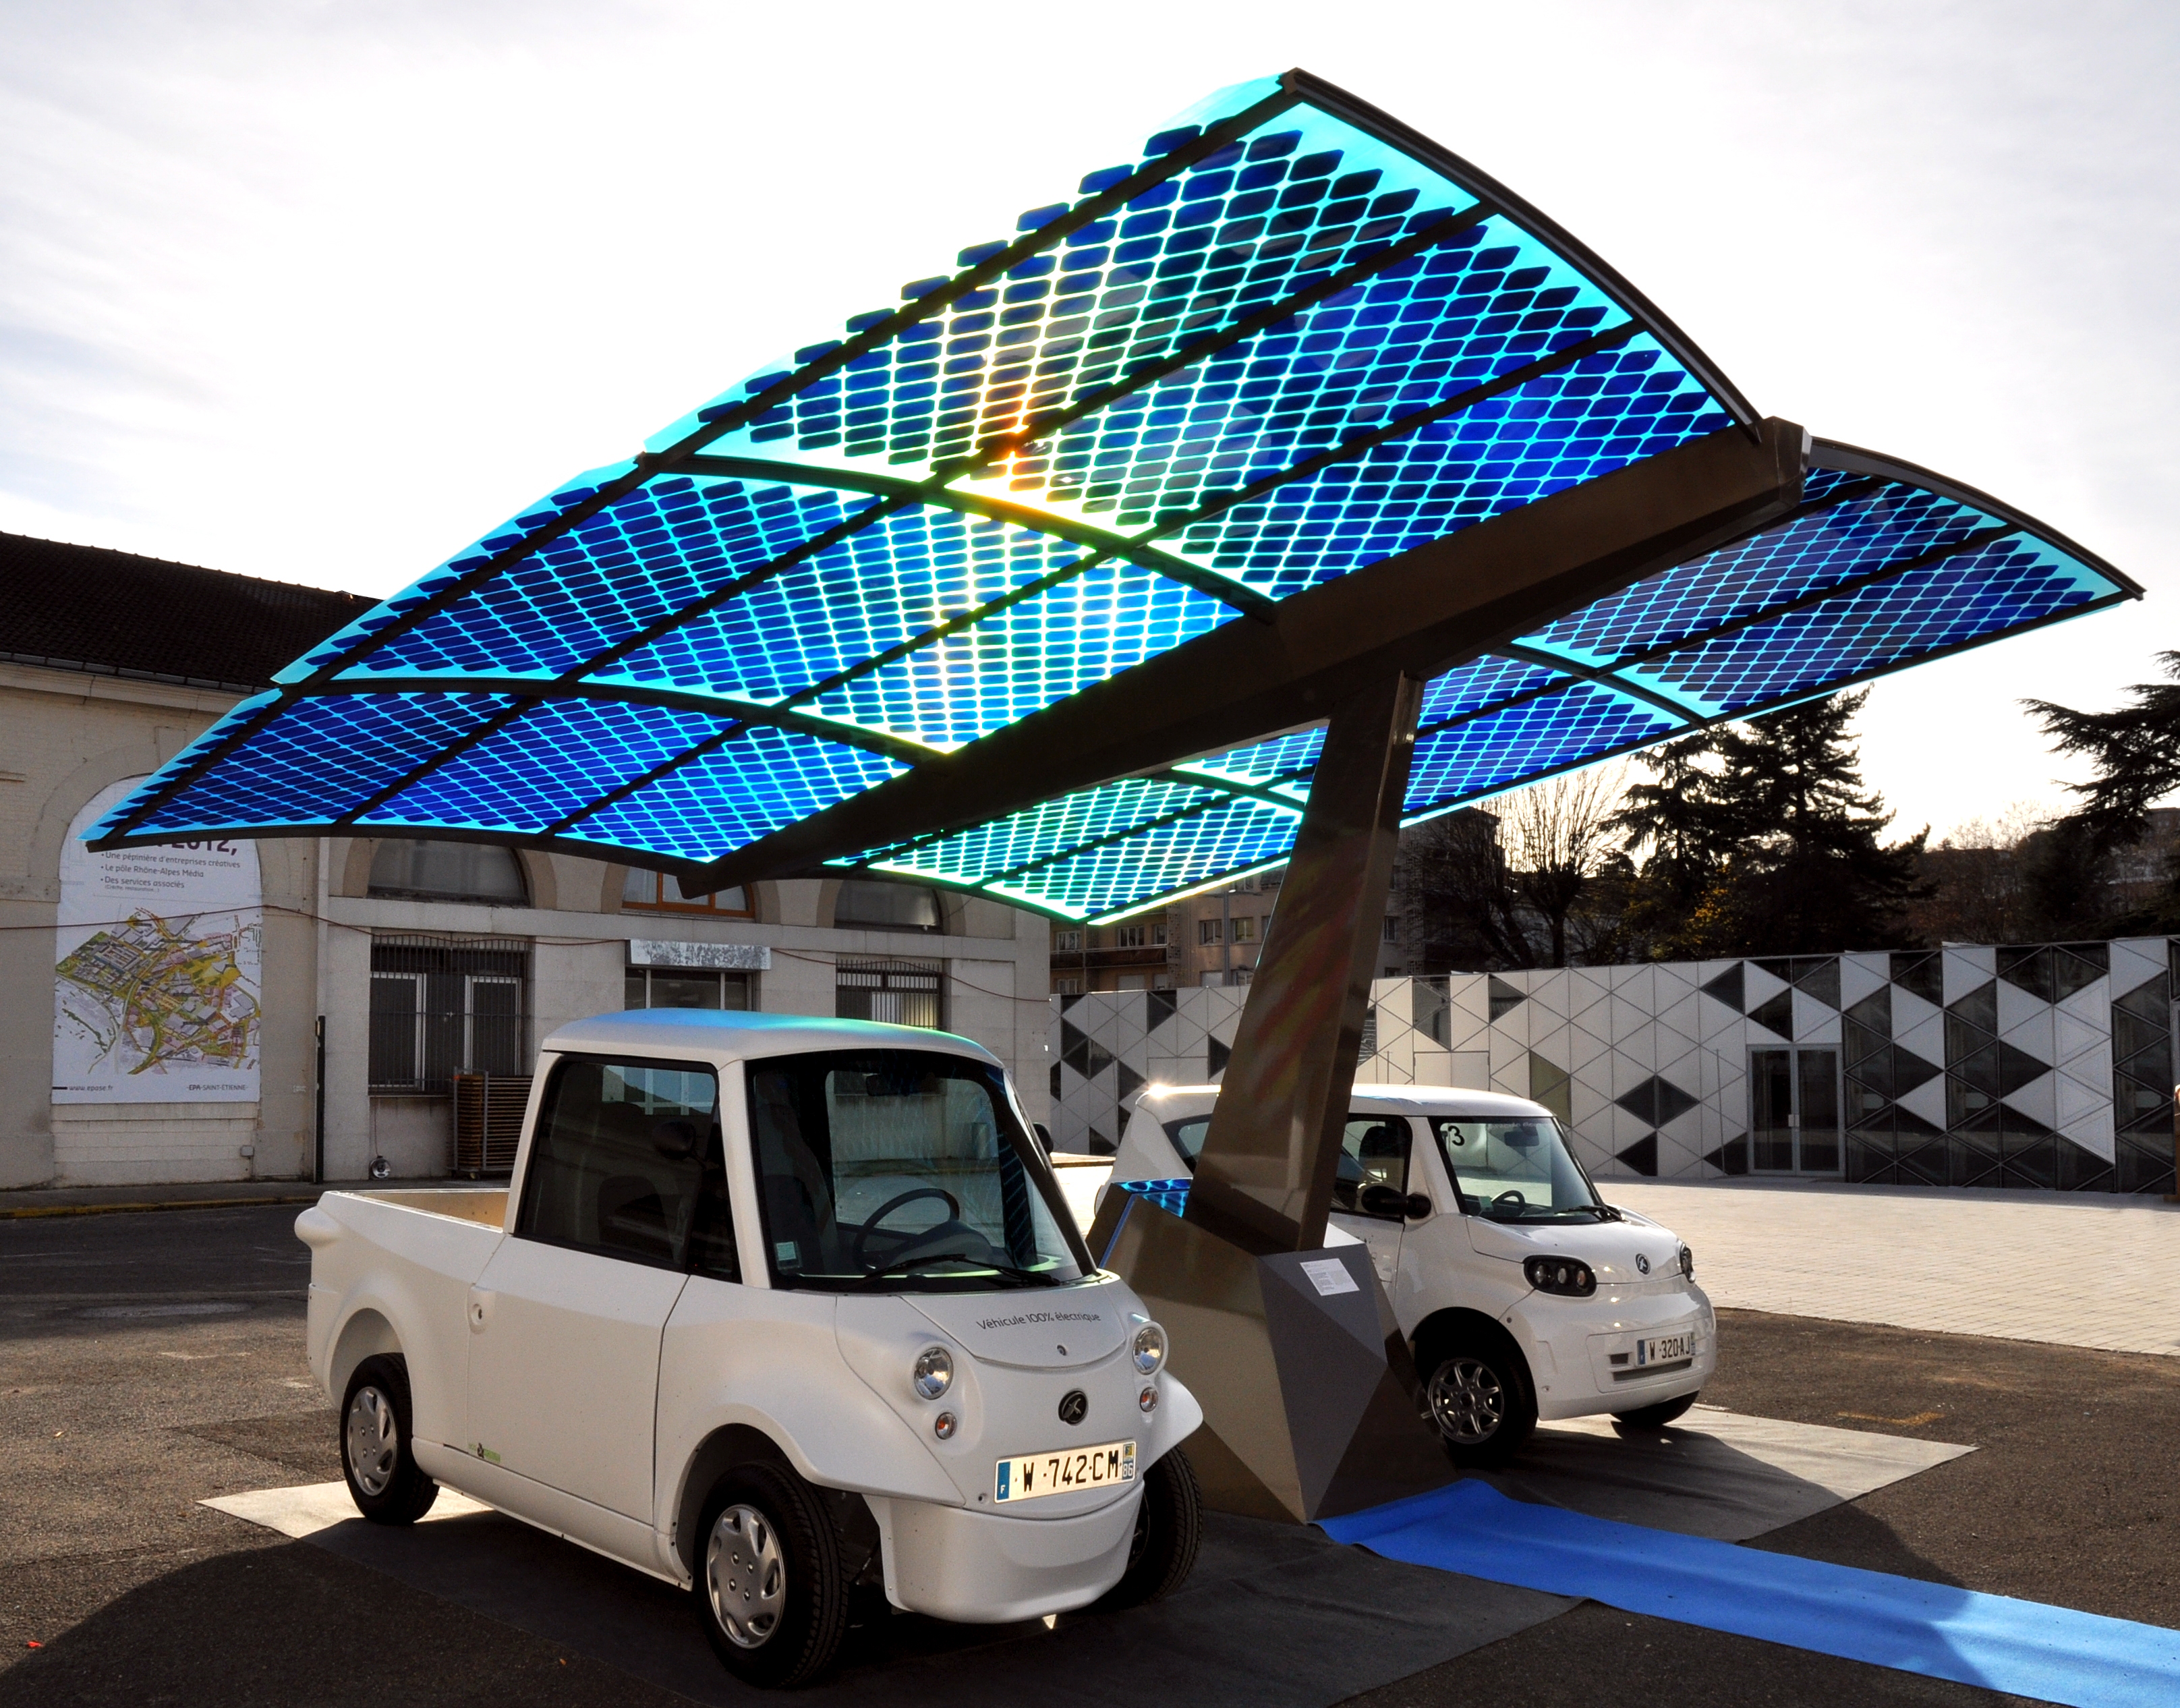 2 electric vehicles sitting under blue Photovoltaic shading structure. Described in caption.